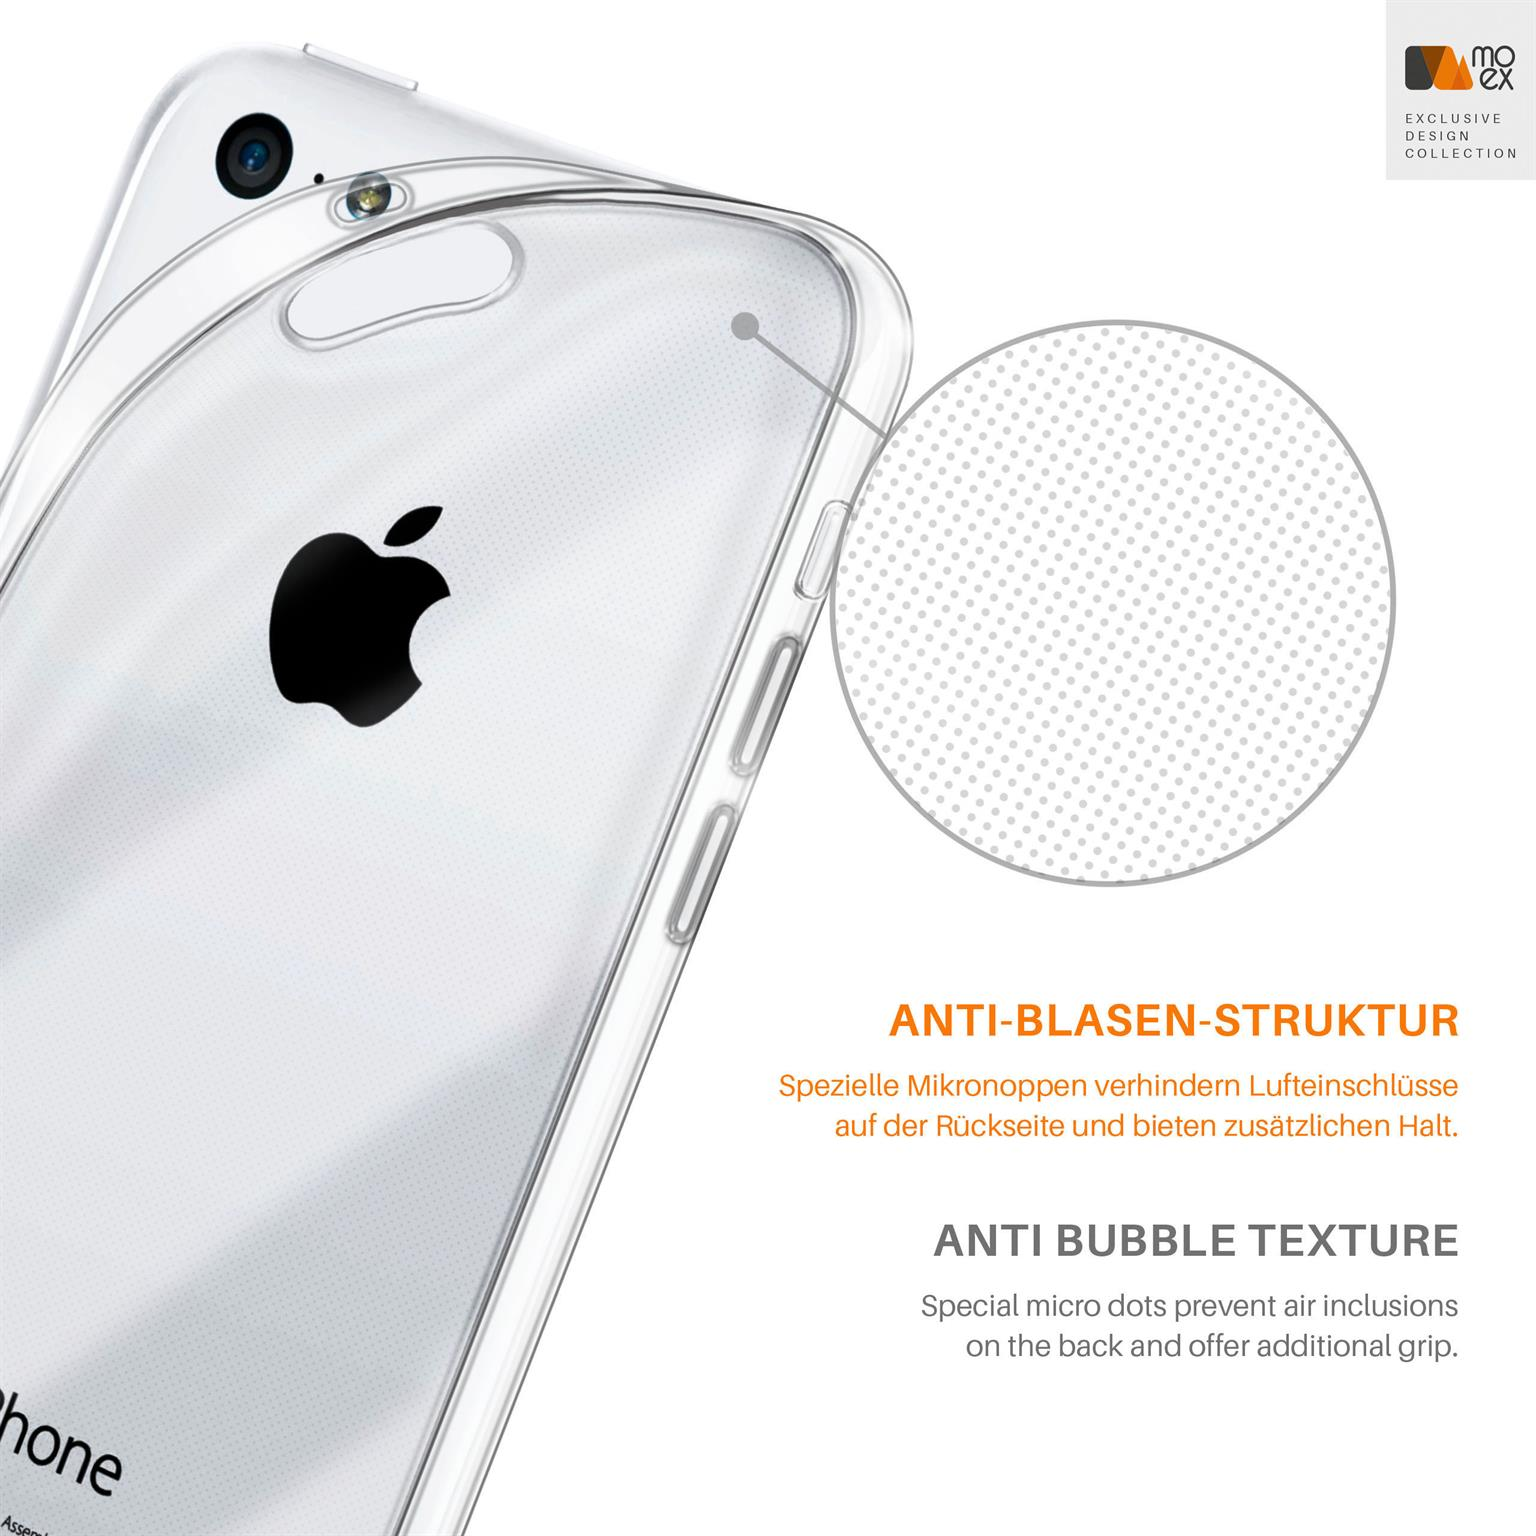 MOEX Aero Backcover, iPhone Case, Crystal-Clear Apple, 5c